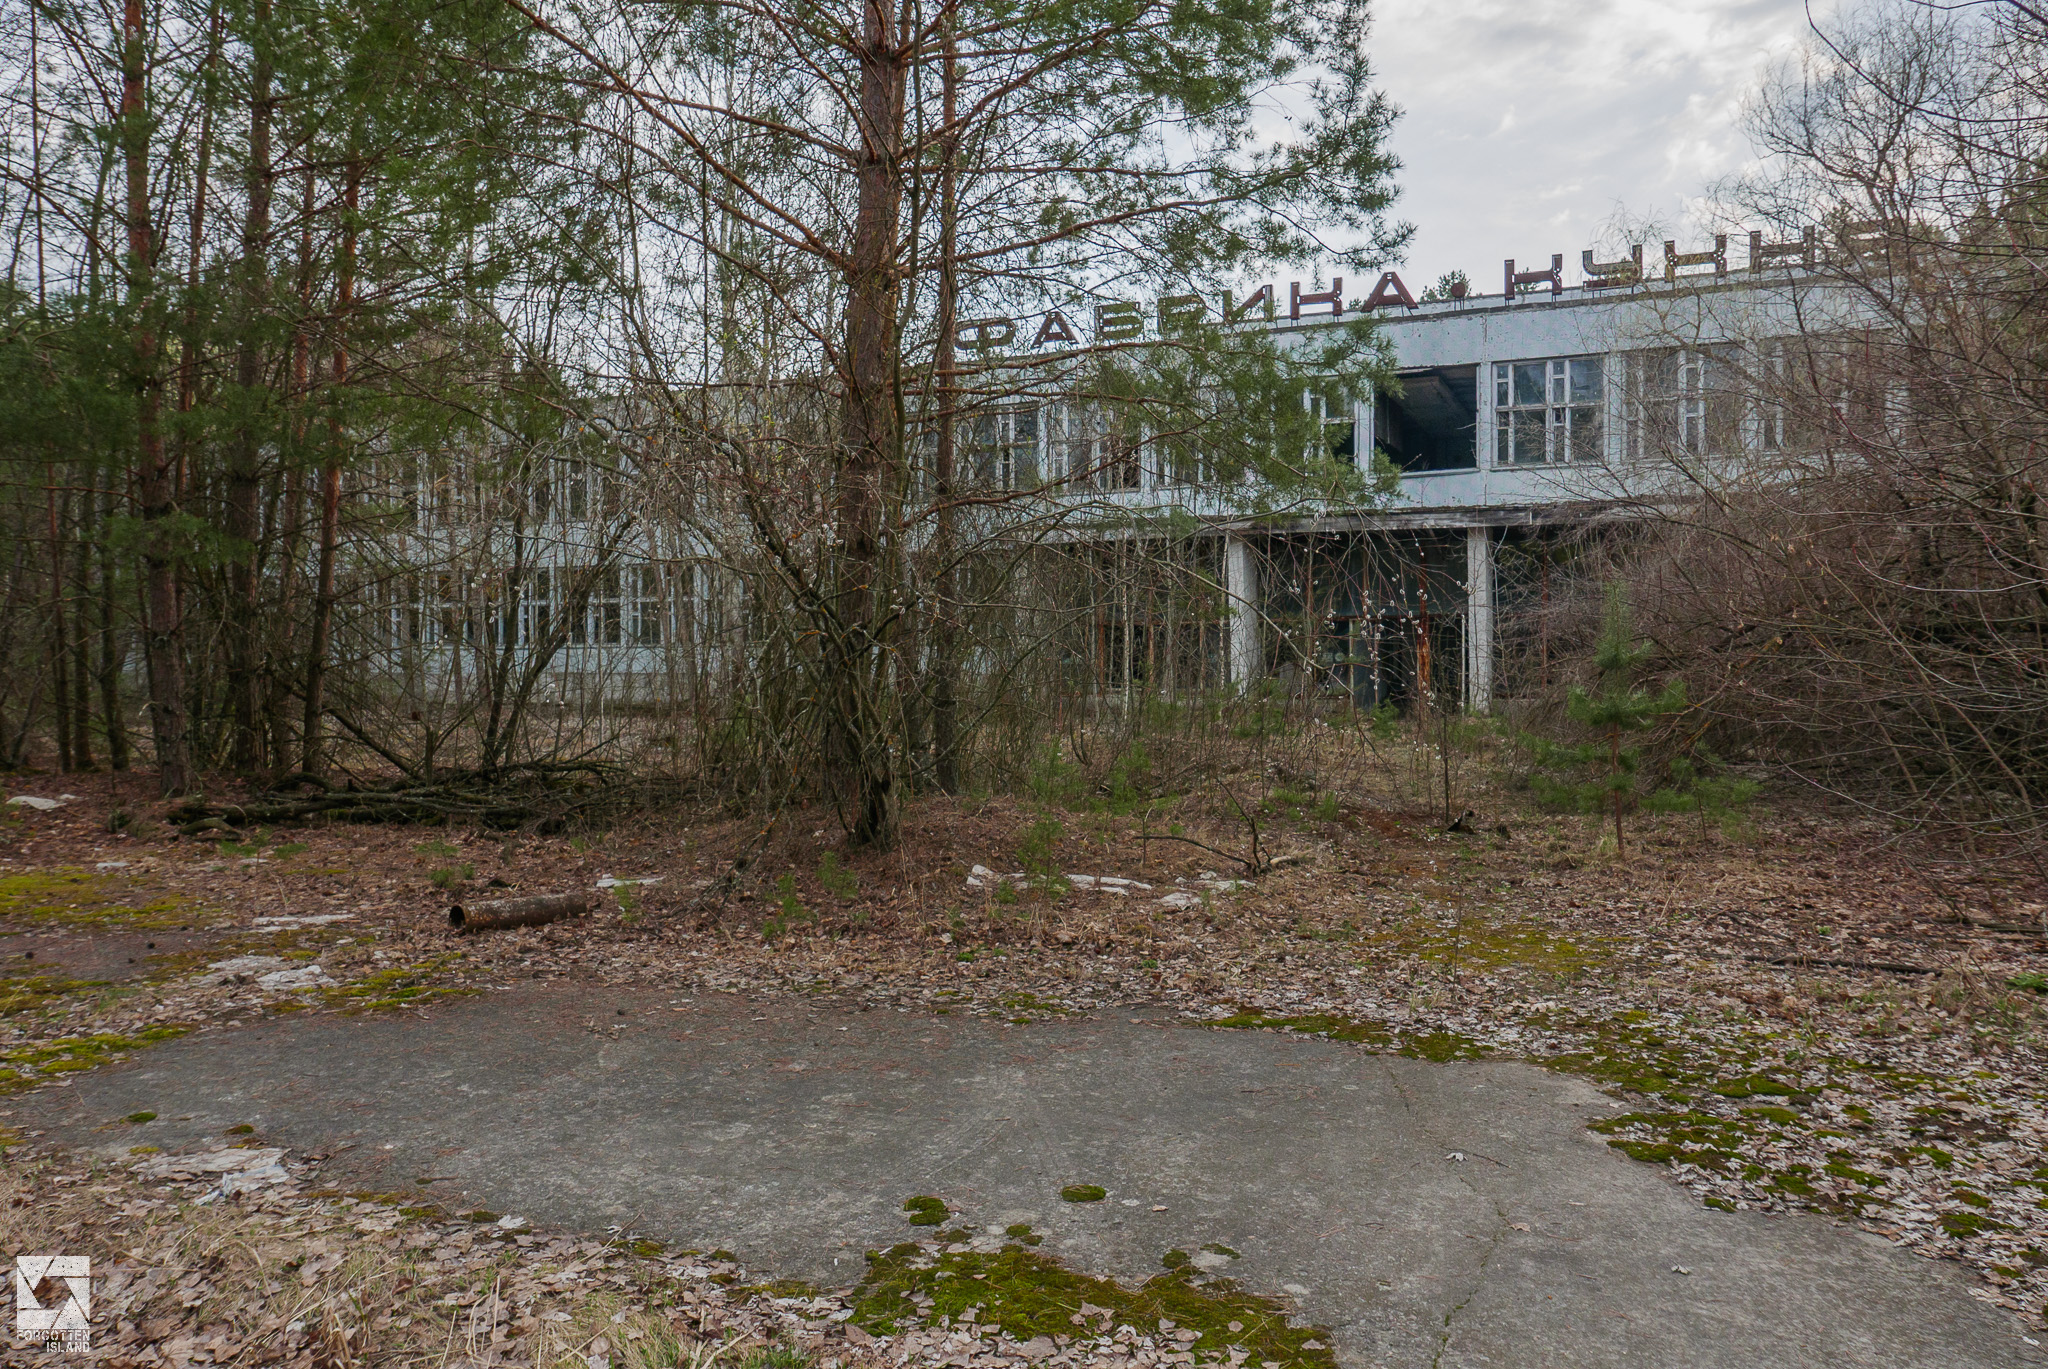 Canteen and Shops in Pripyat